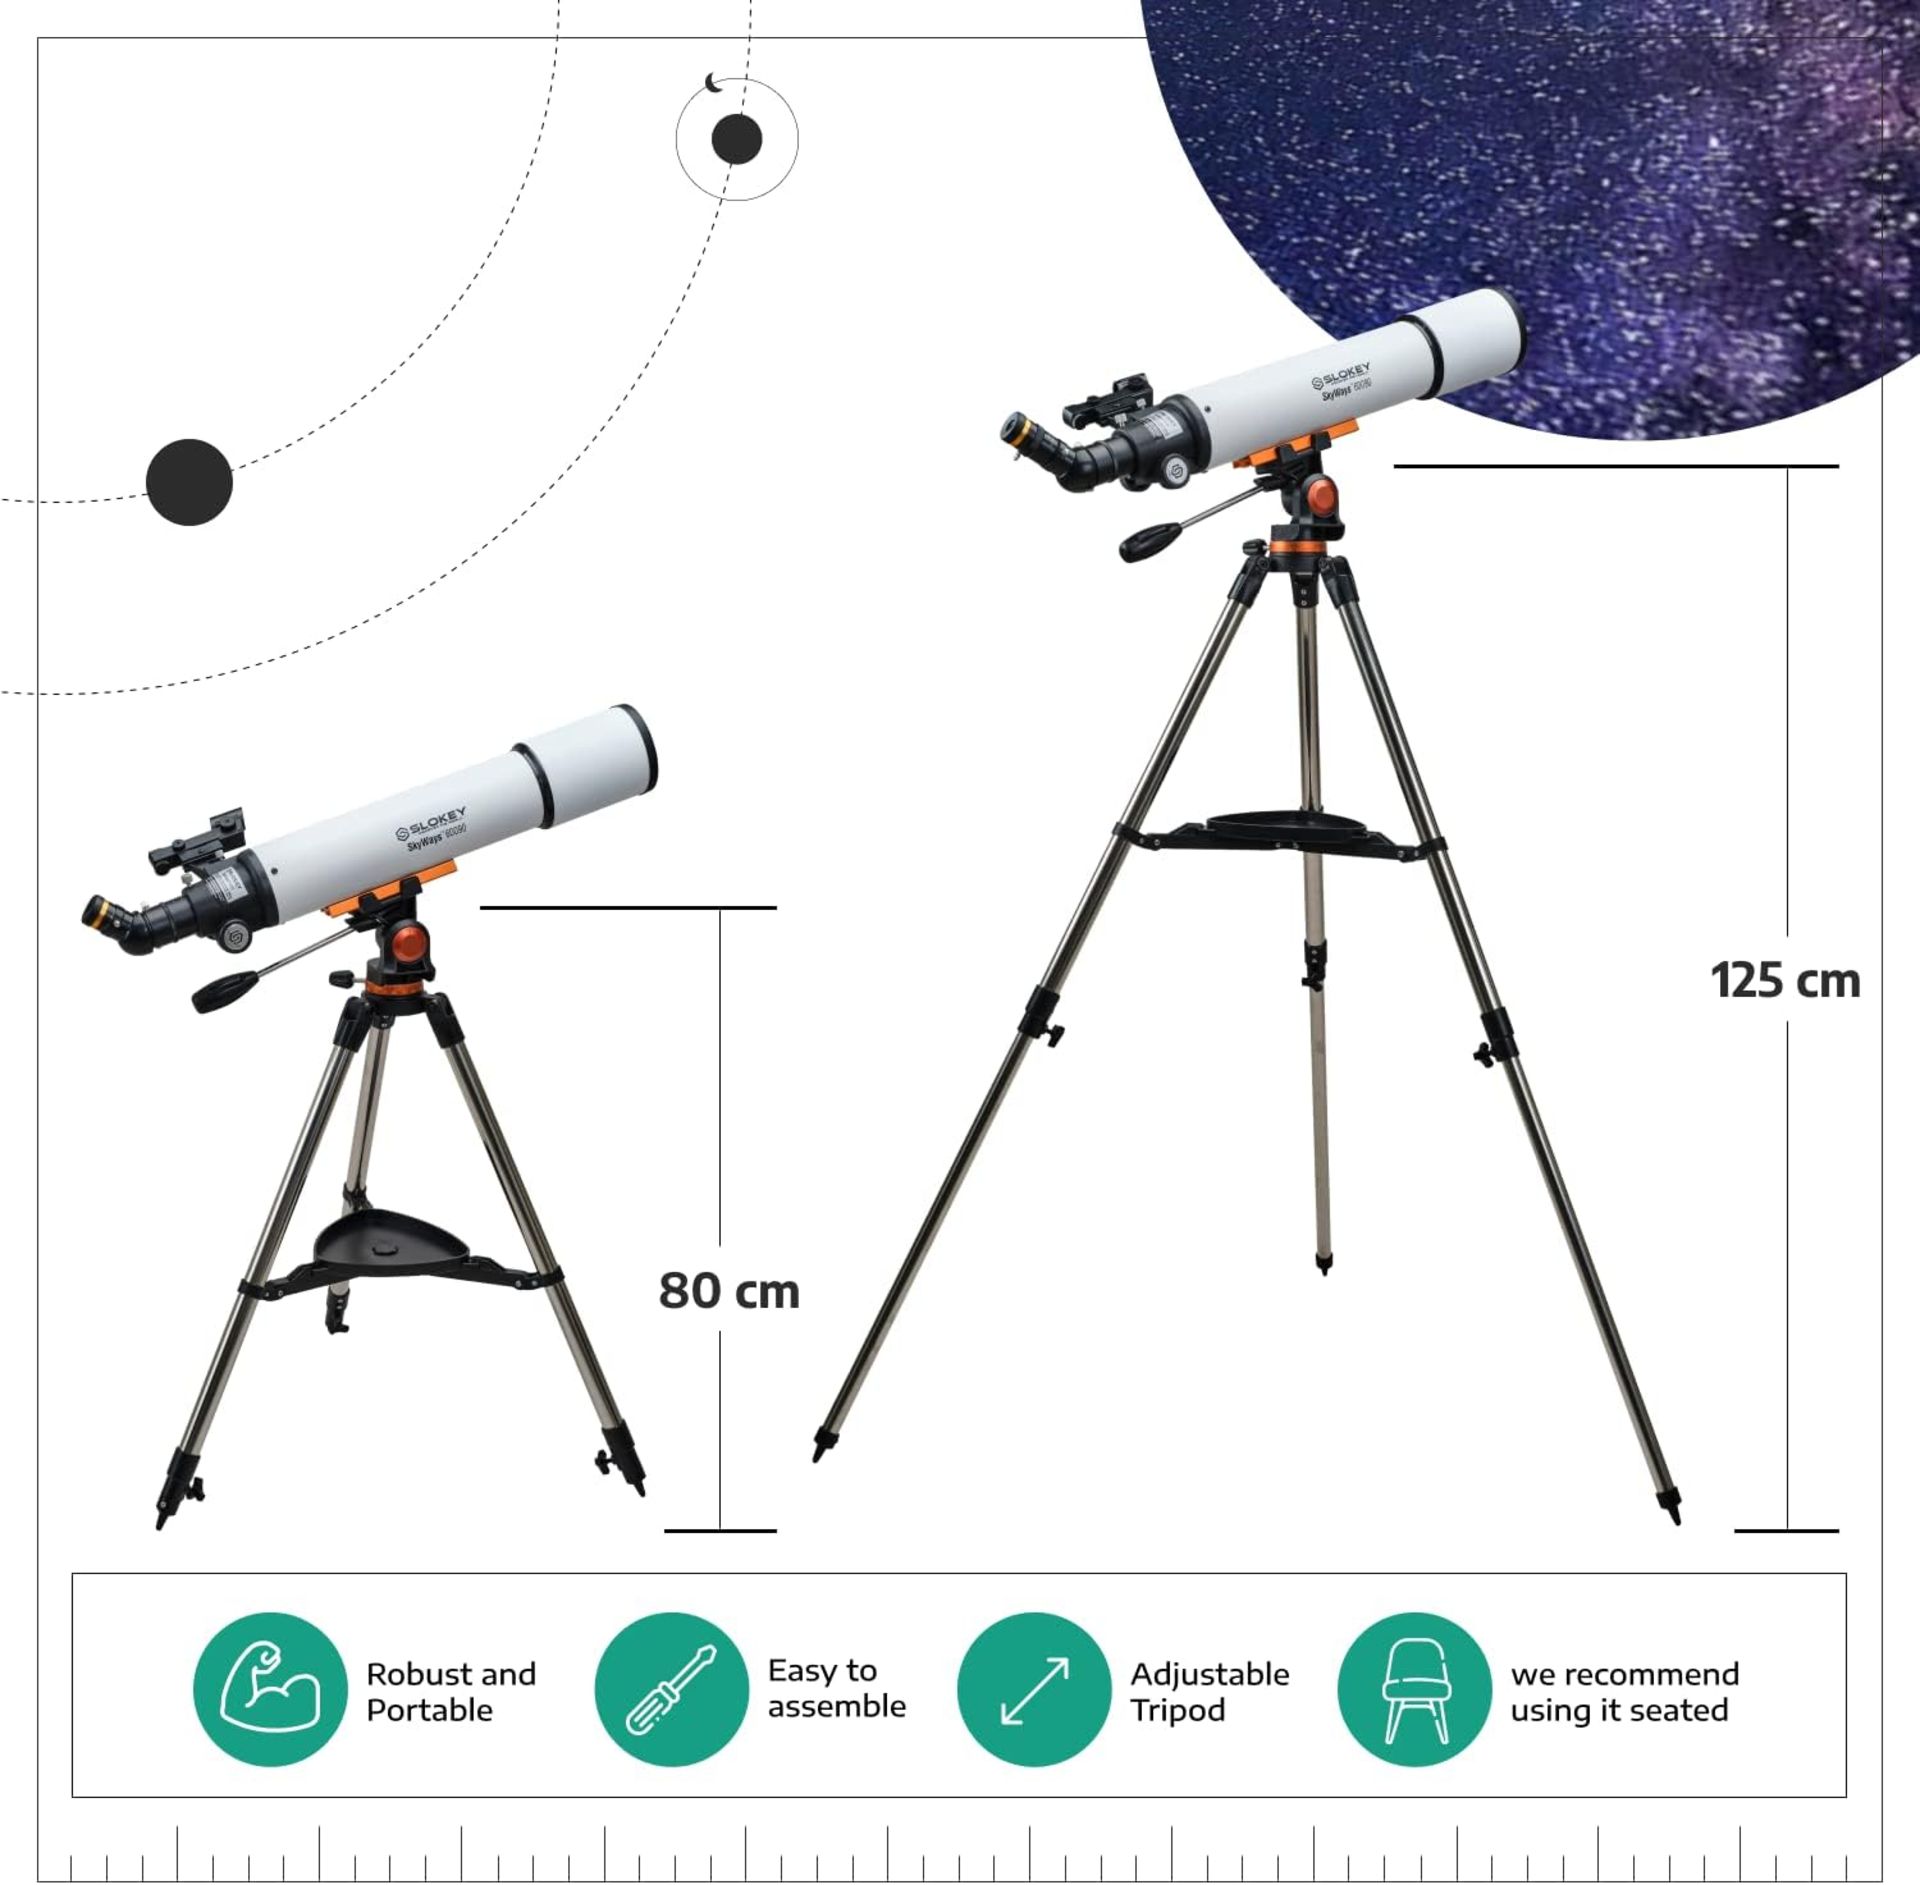 Slokey 60090 SKYWAYS TELESCOPE FOR ASTRONOMY WITH ACCESSORIES (NEW) - AMAZON PRICE Â£299.99! - Image 8 of 9